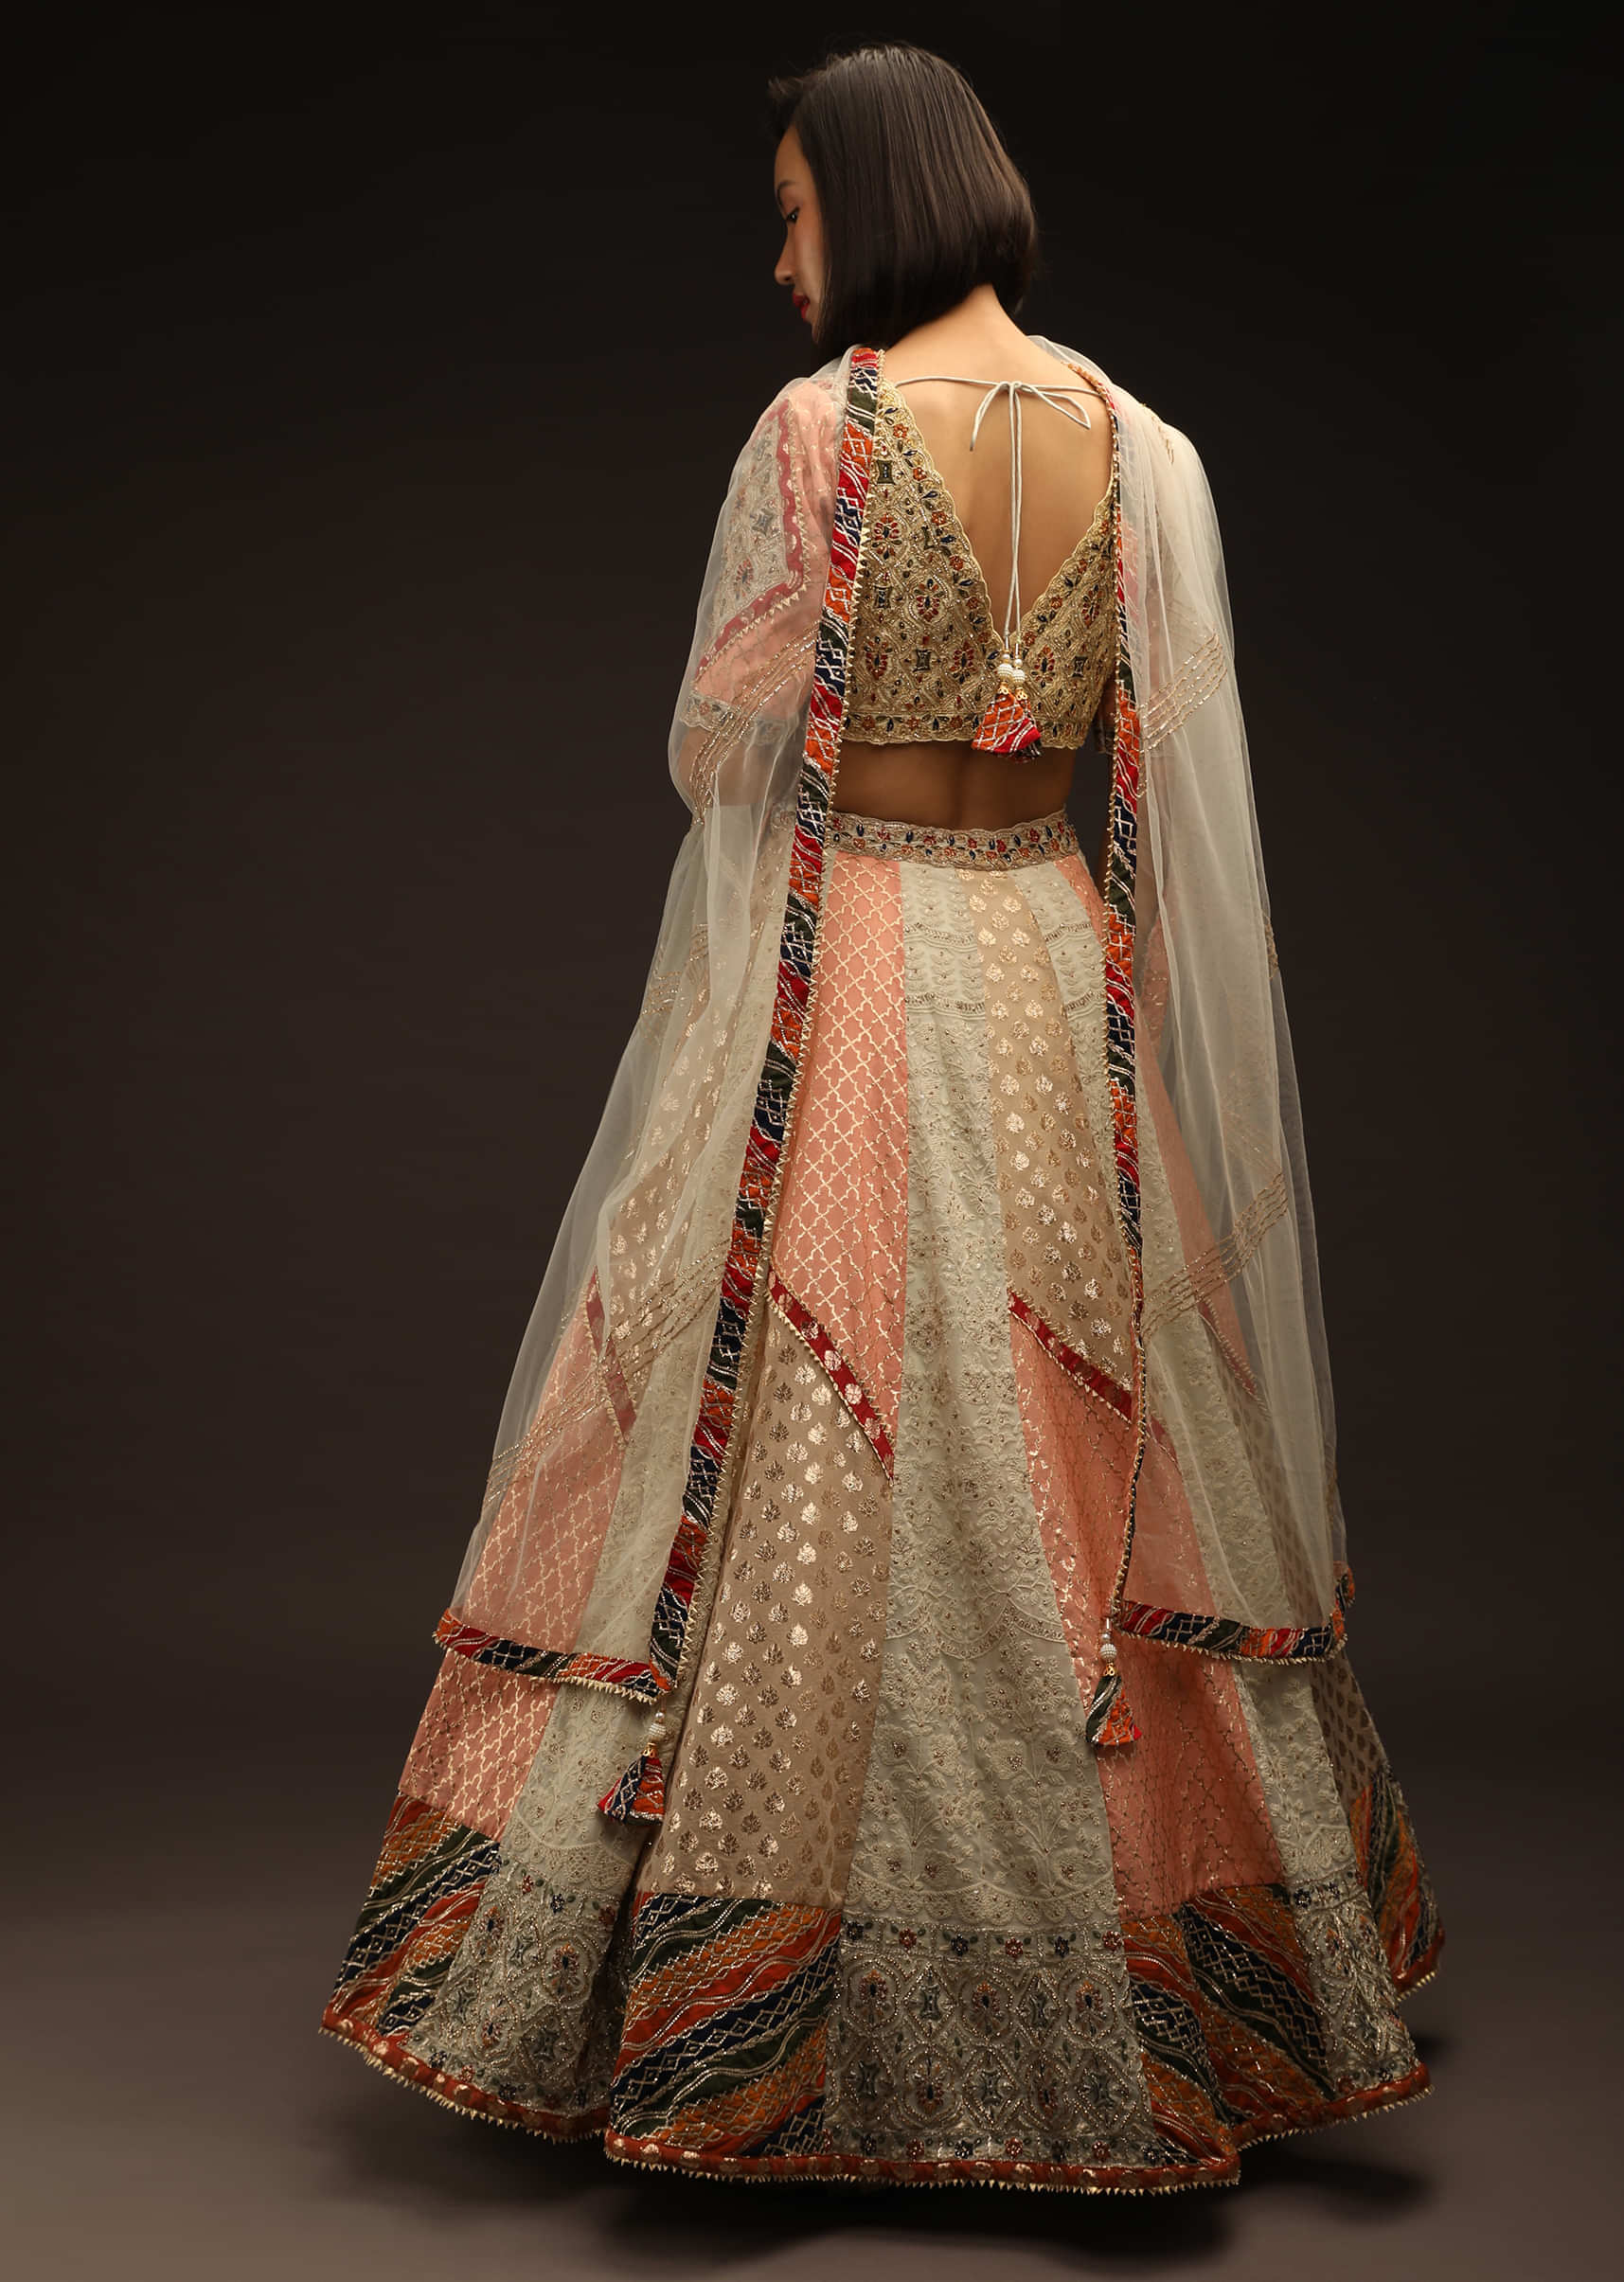 Multi Colored Lehenga Choli With Alternating Kalis Featuring Brocade Detailing And Lucknowi Thread Work